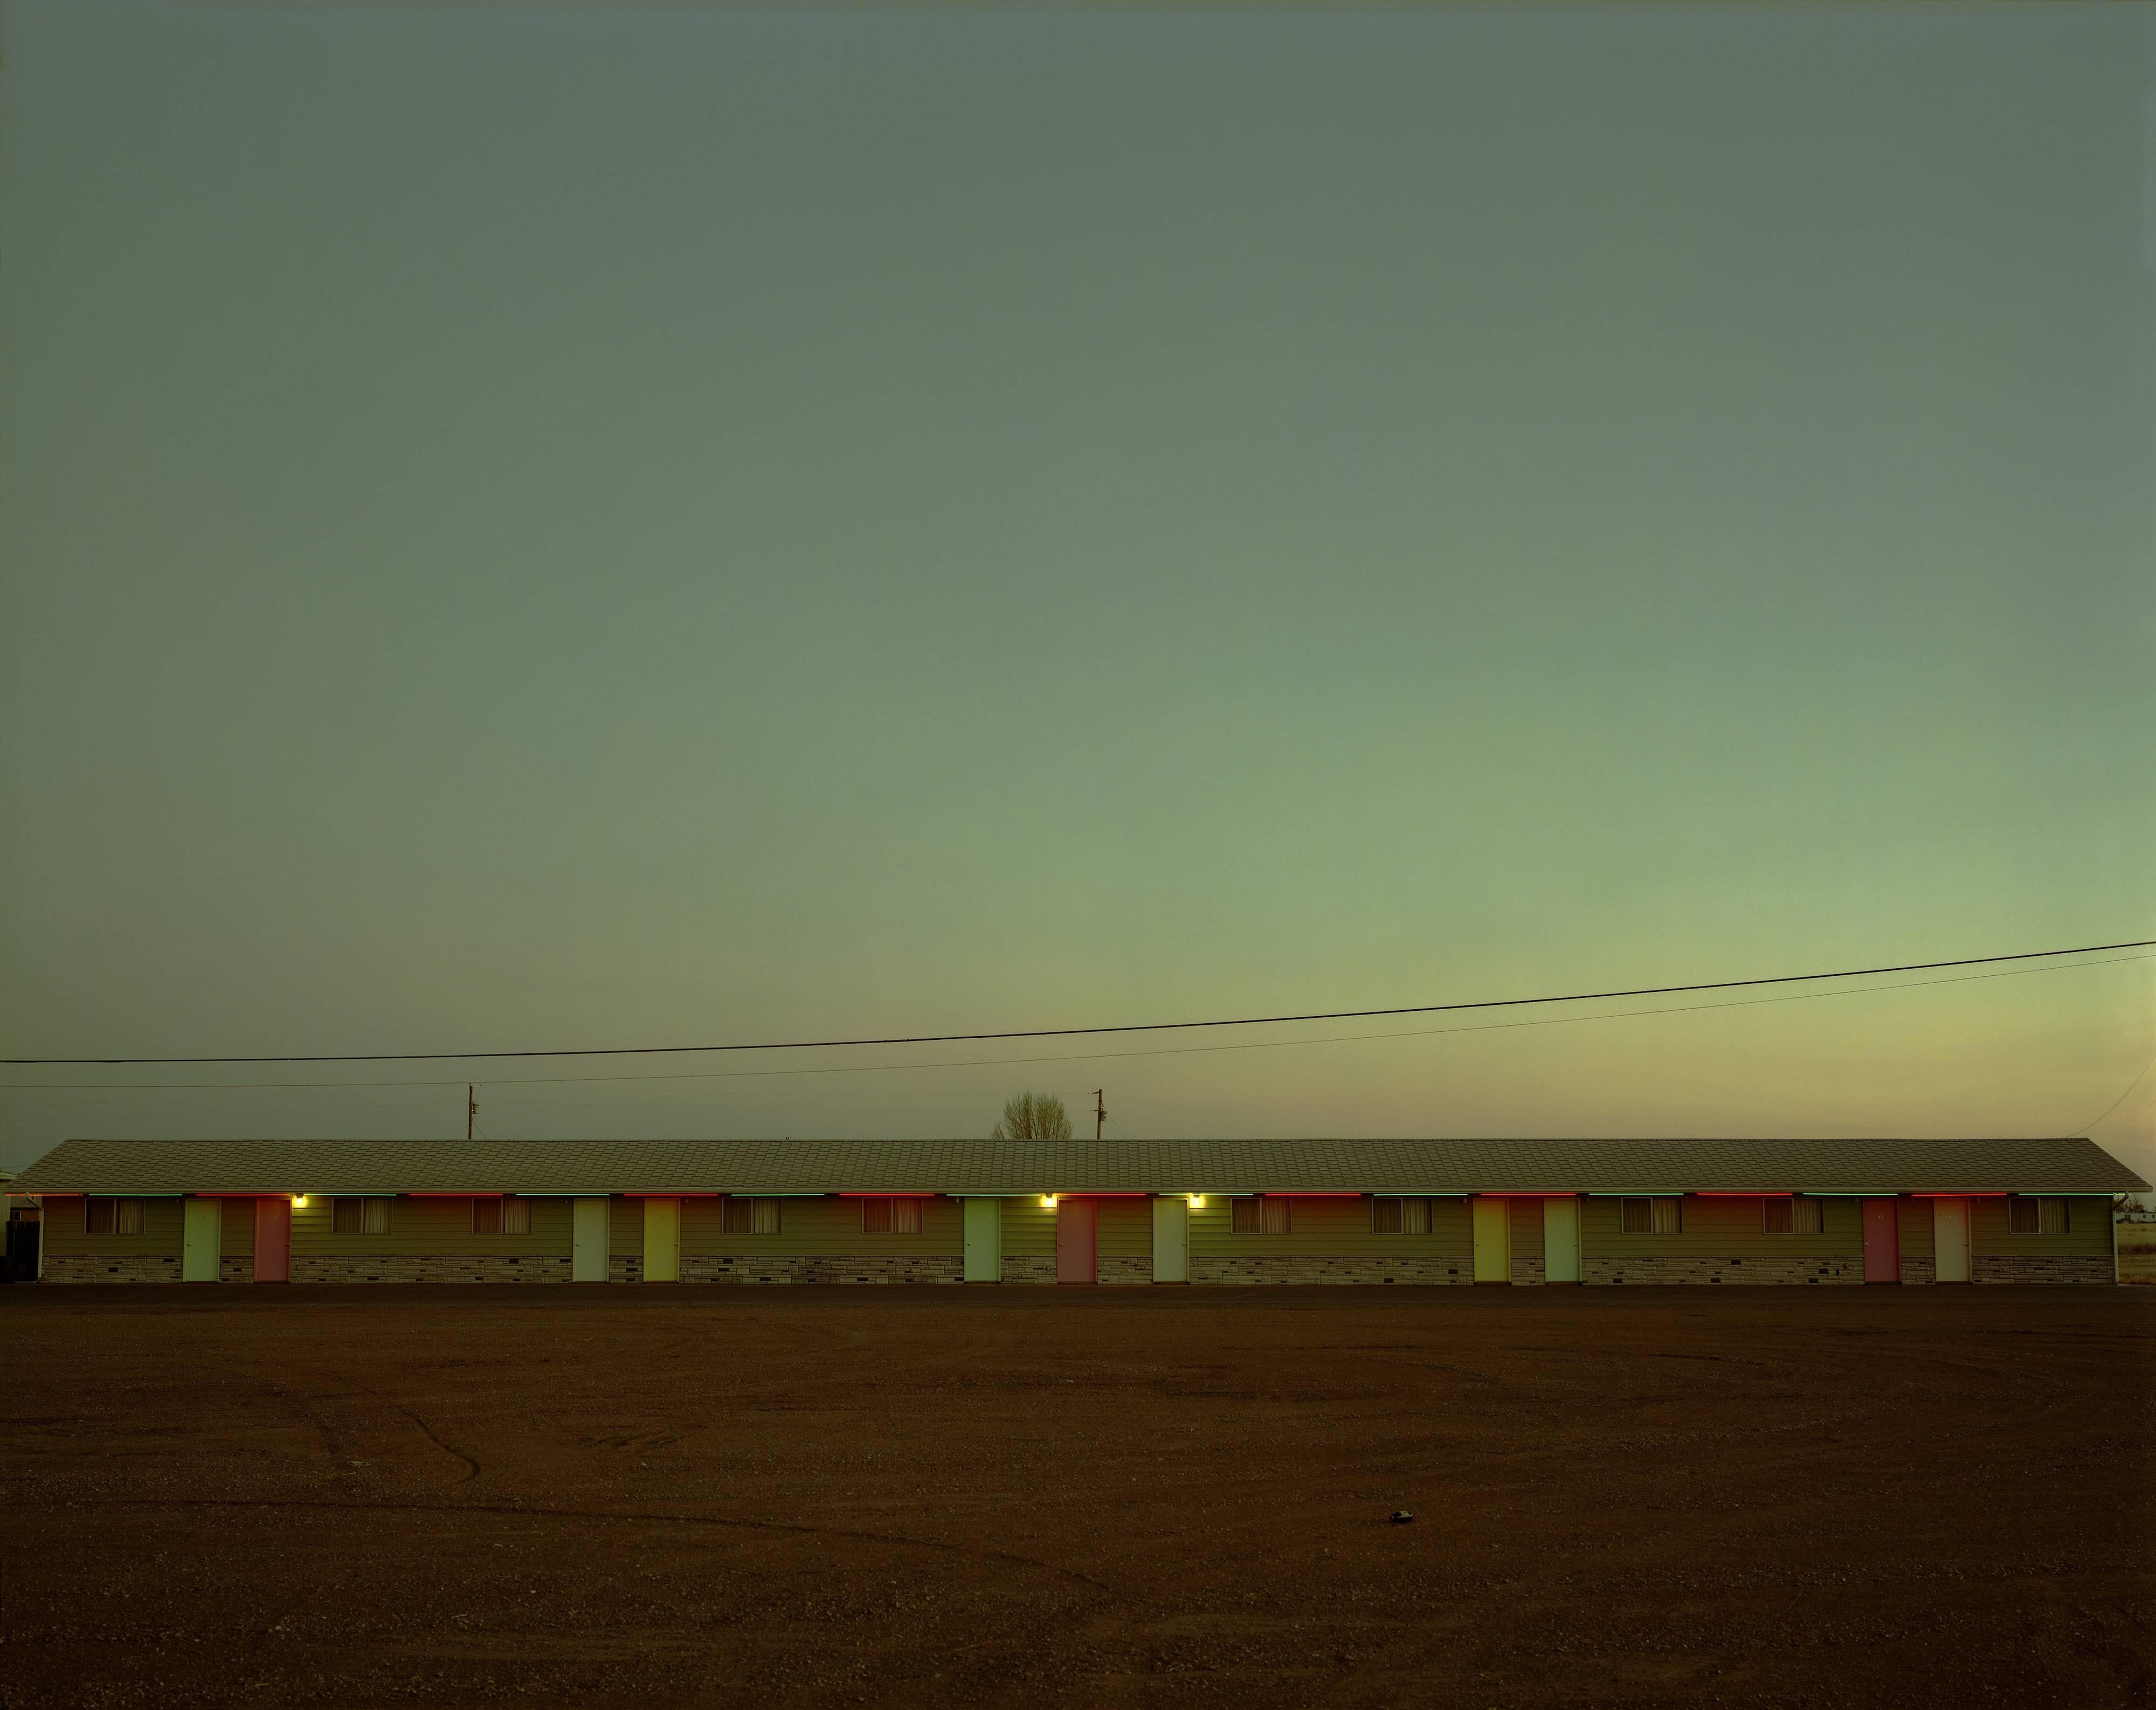 Steve Fitch Color Photograph - Siesta Motel, Highway 66, Moriarty, New Mexico, March 29, 1981